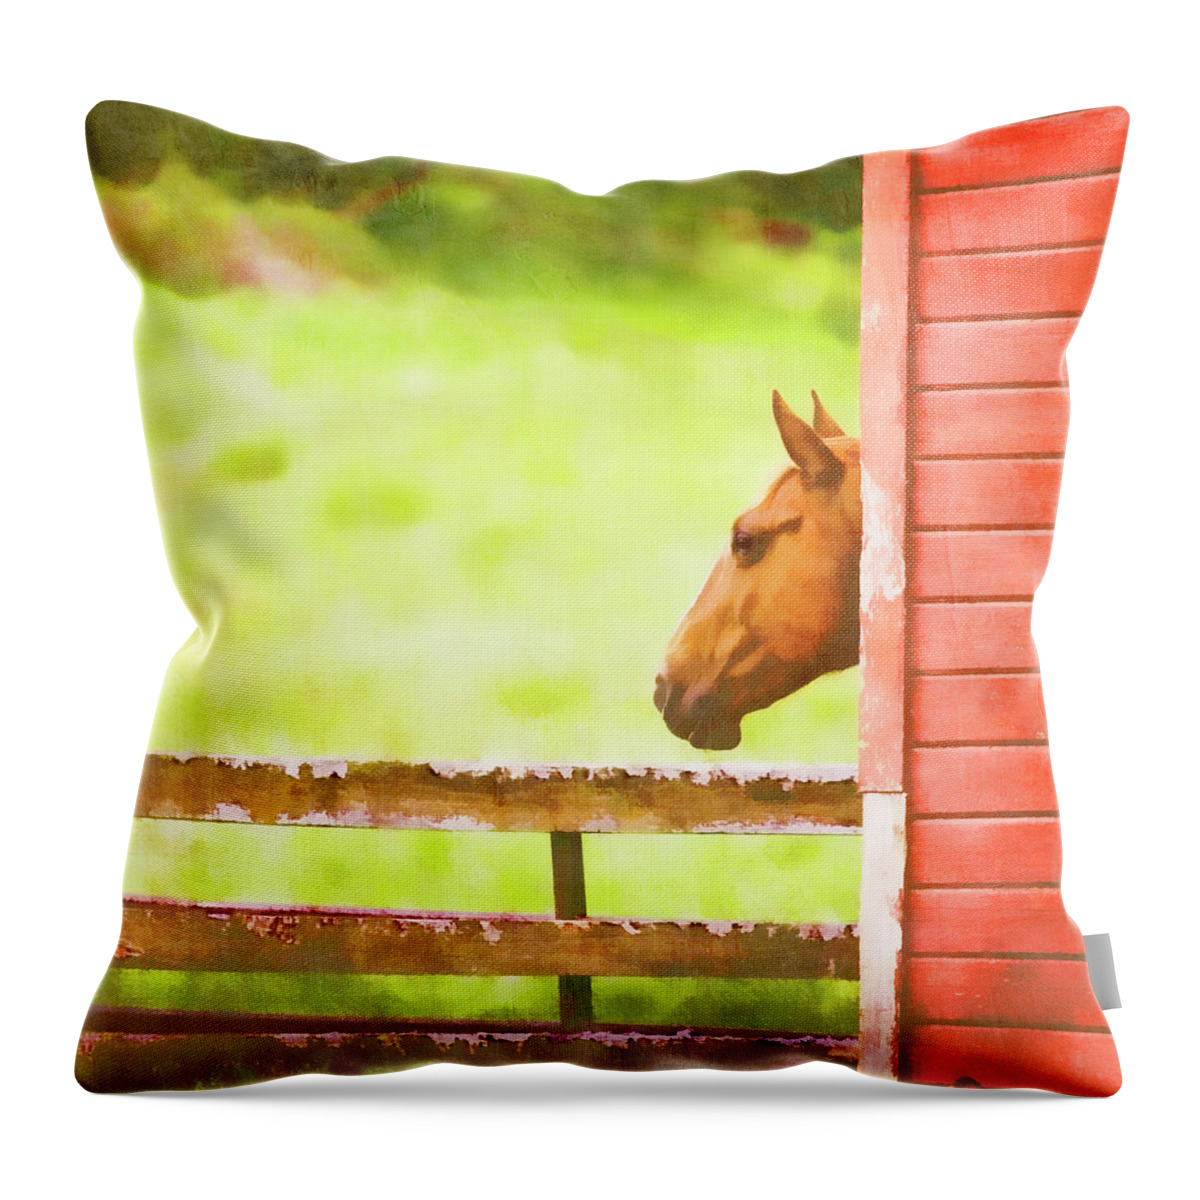 Horse Throw Pillow featuring the photograph Good Morning Sunshine by Carol Leigh